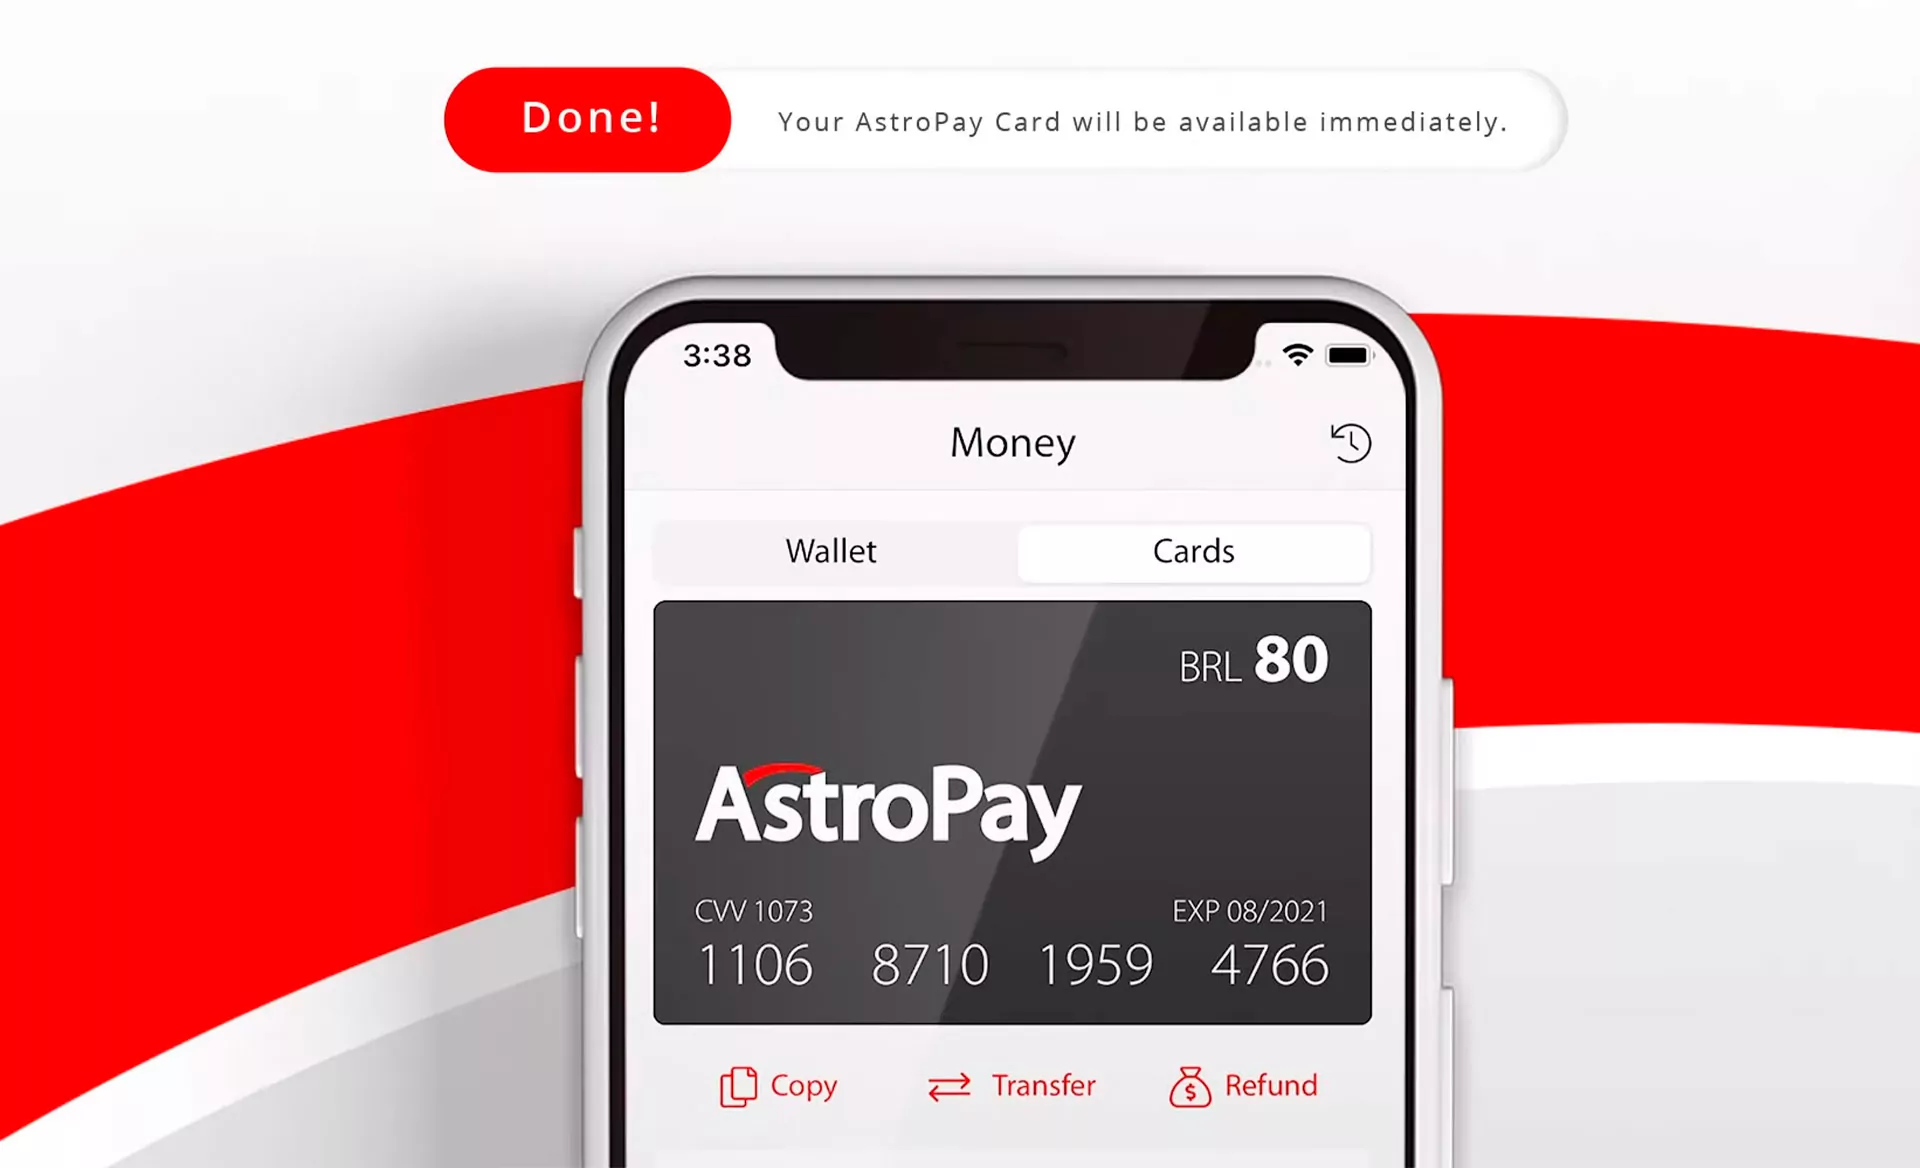 Now you can deposit and withdraw money with the help of Astropay.